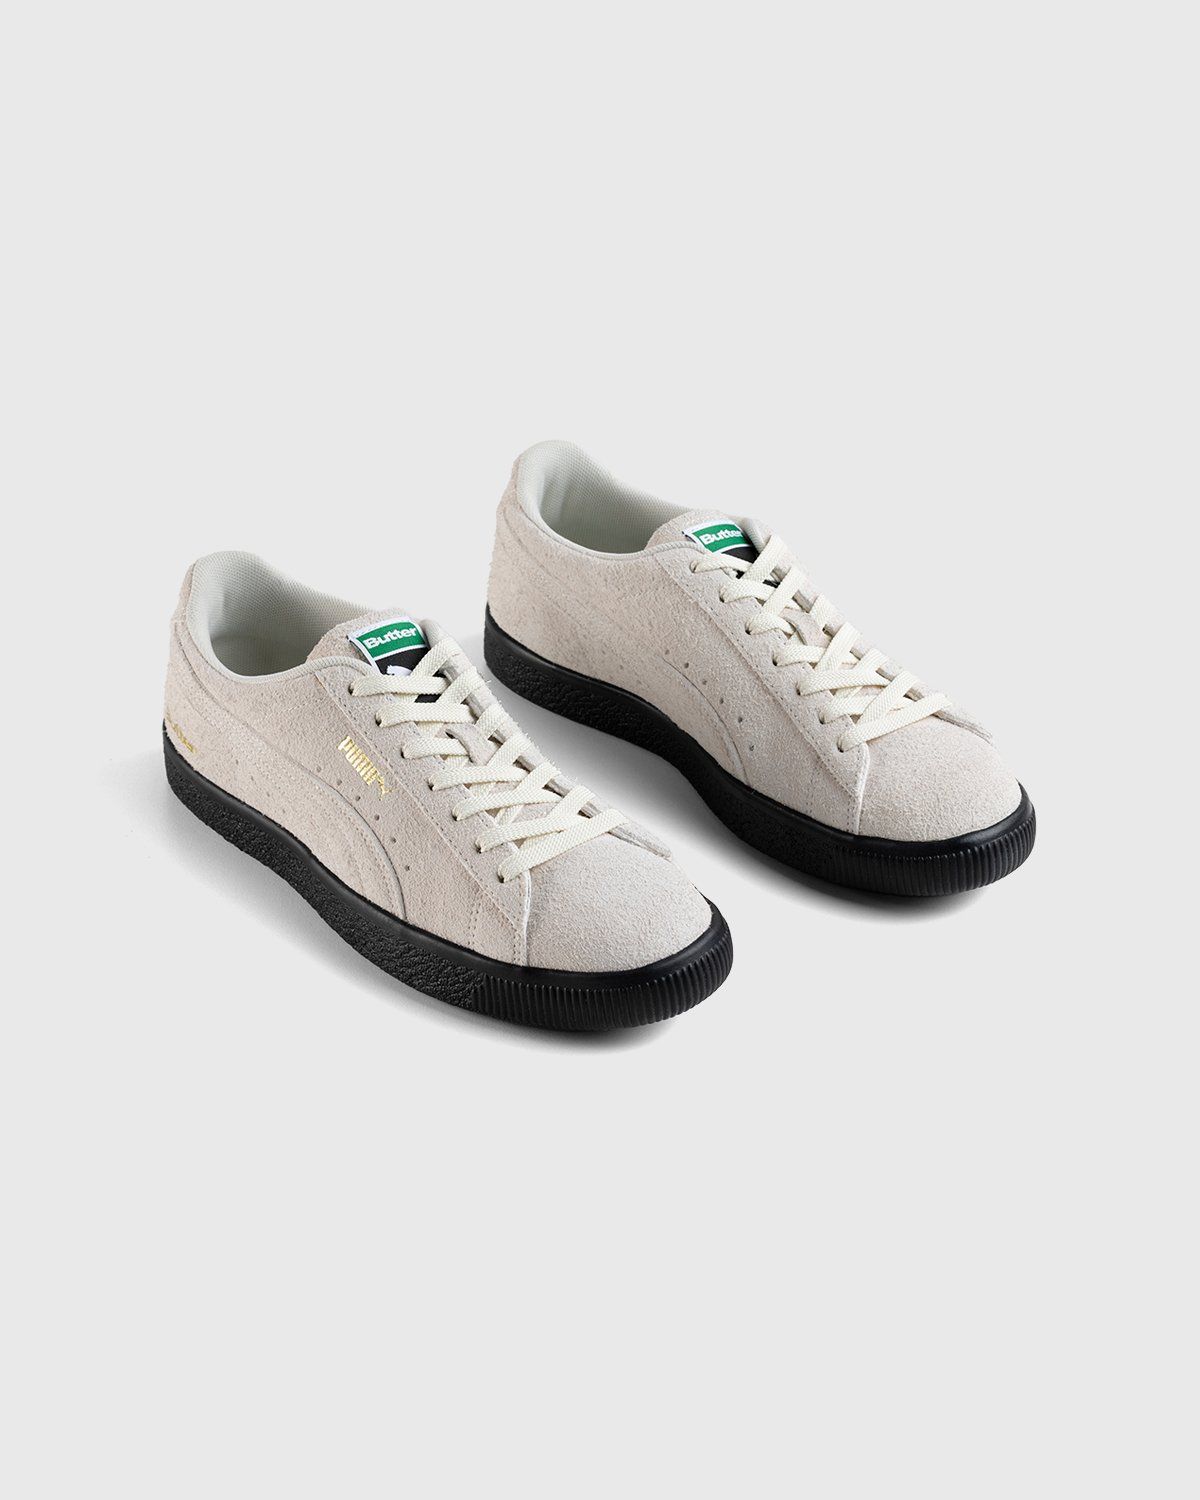 Puma x Butter Goods – Suede VTG Whisper White/Puma Black - Sneakers - Green - Image 3